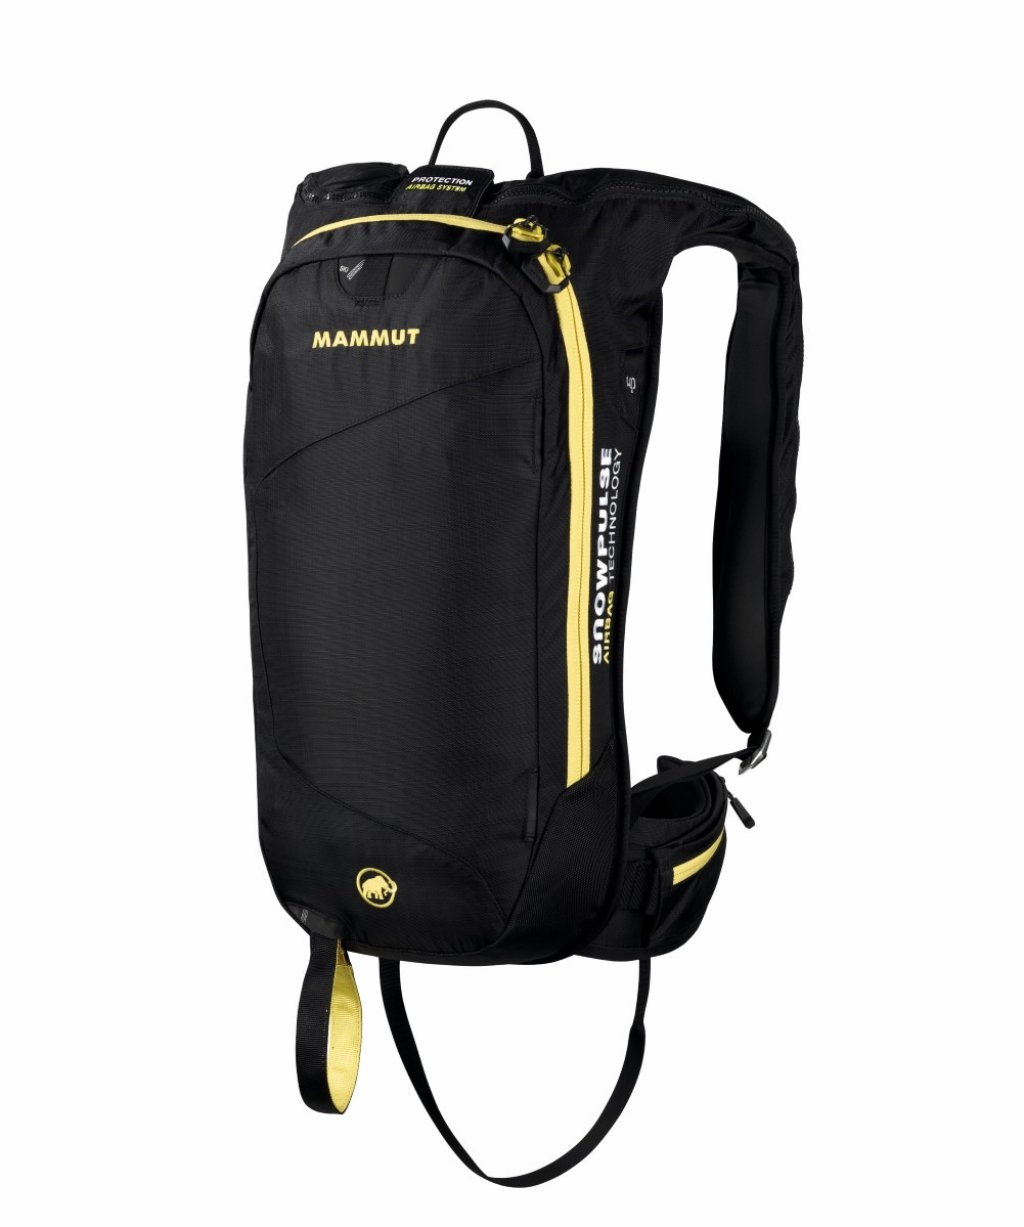 The Mammut Rocker Protection 15 airbag backpack is the ideal companion for freeriders operating close to the slopes.